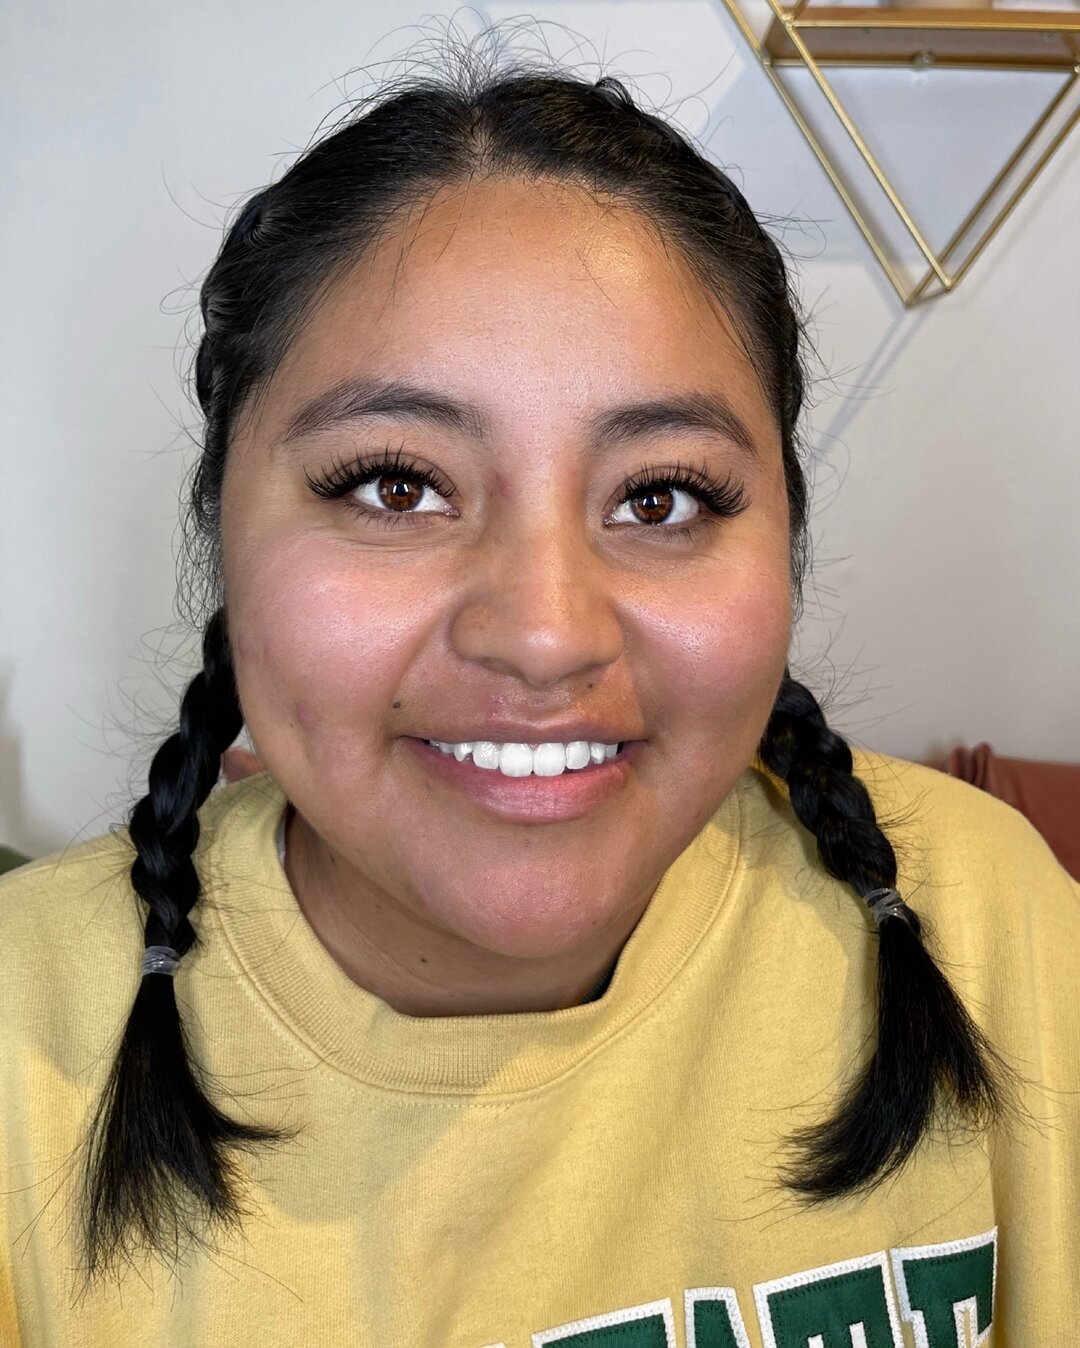 𝐍𝐚𝐭𝐮𝐫𝐚𝐥 𝐘𝐞𝐭 𝐖𝐢𝐬𝐩𝐲 𝐋𝐚𝐬𝐡𝐞𝐬 ⁣
Bernardette had been my loyal Brazilian client for quite some time, but last year she decided to up her lash game with lash extensions. 

Although she loved her first classic lash set, she quickly switc